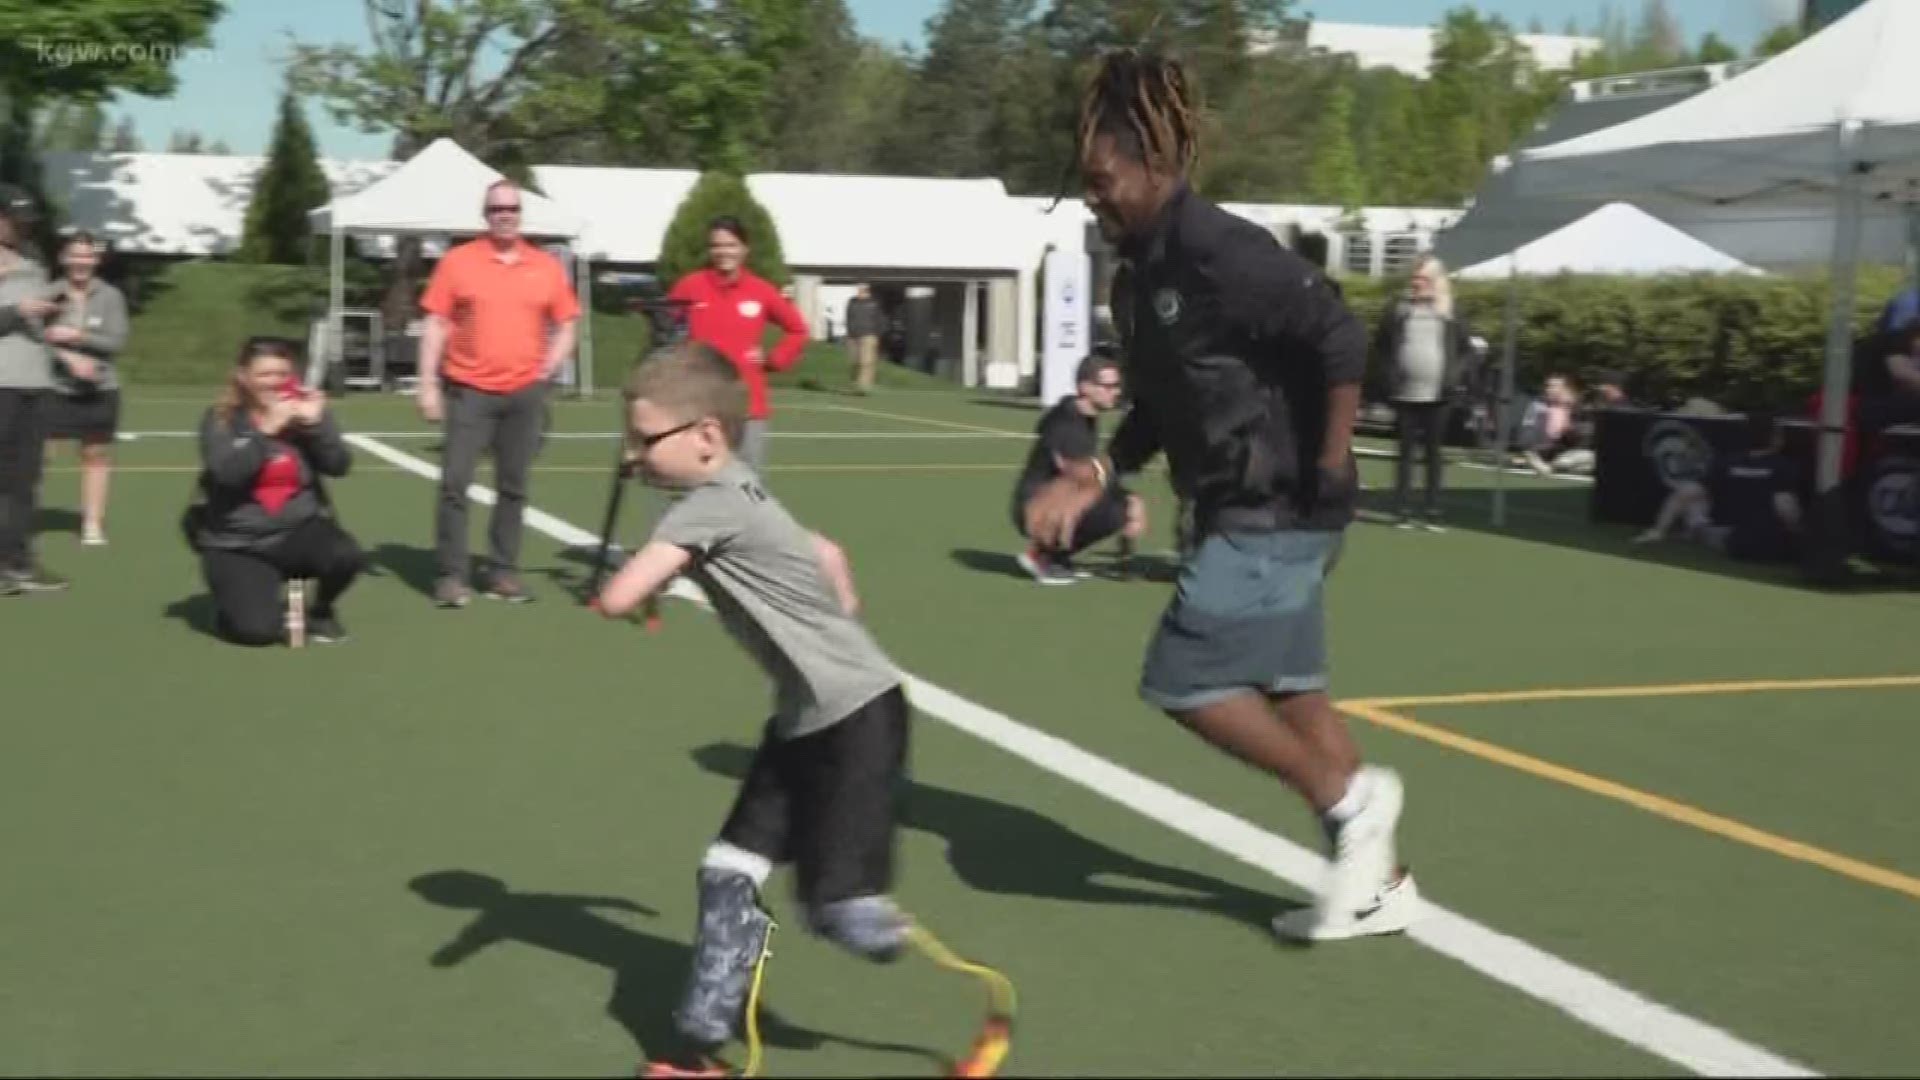 A 10-year-old boy from Salem, Oregon has a new way to get active and play thanks in part to a special delivery from an NFL inspiration.